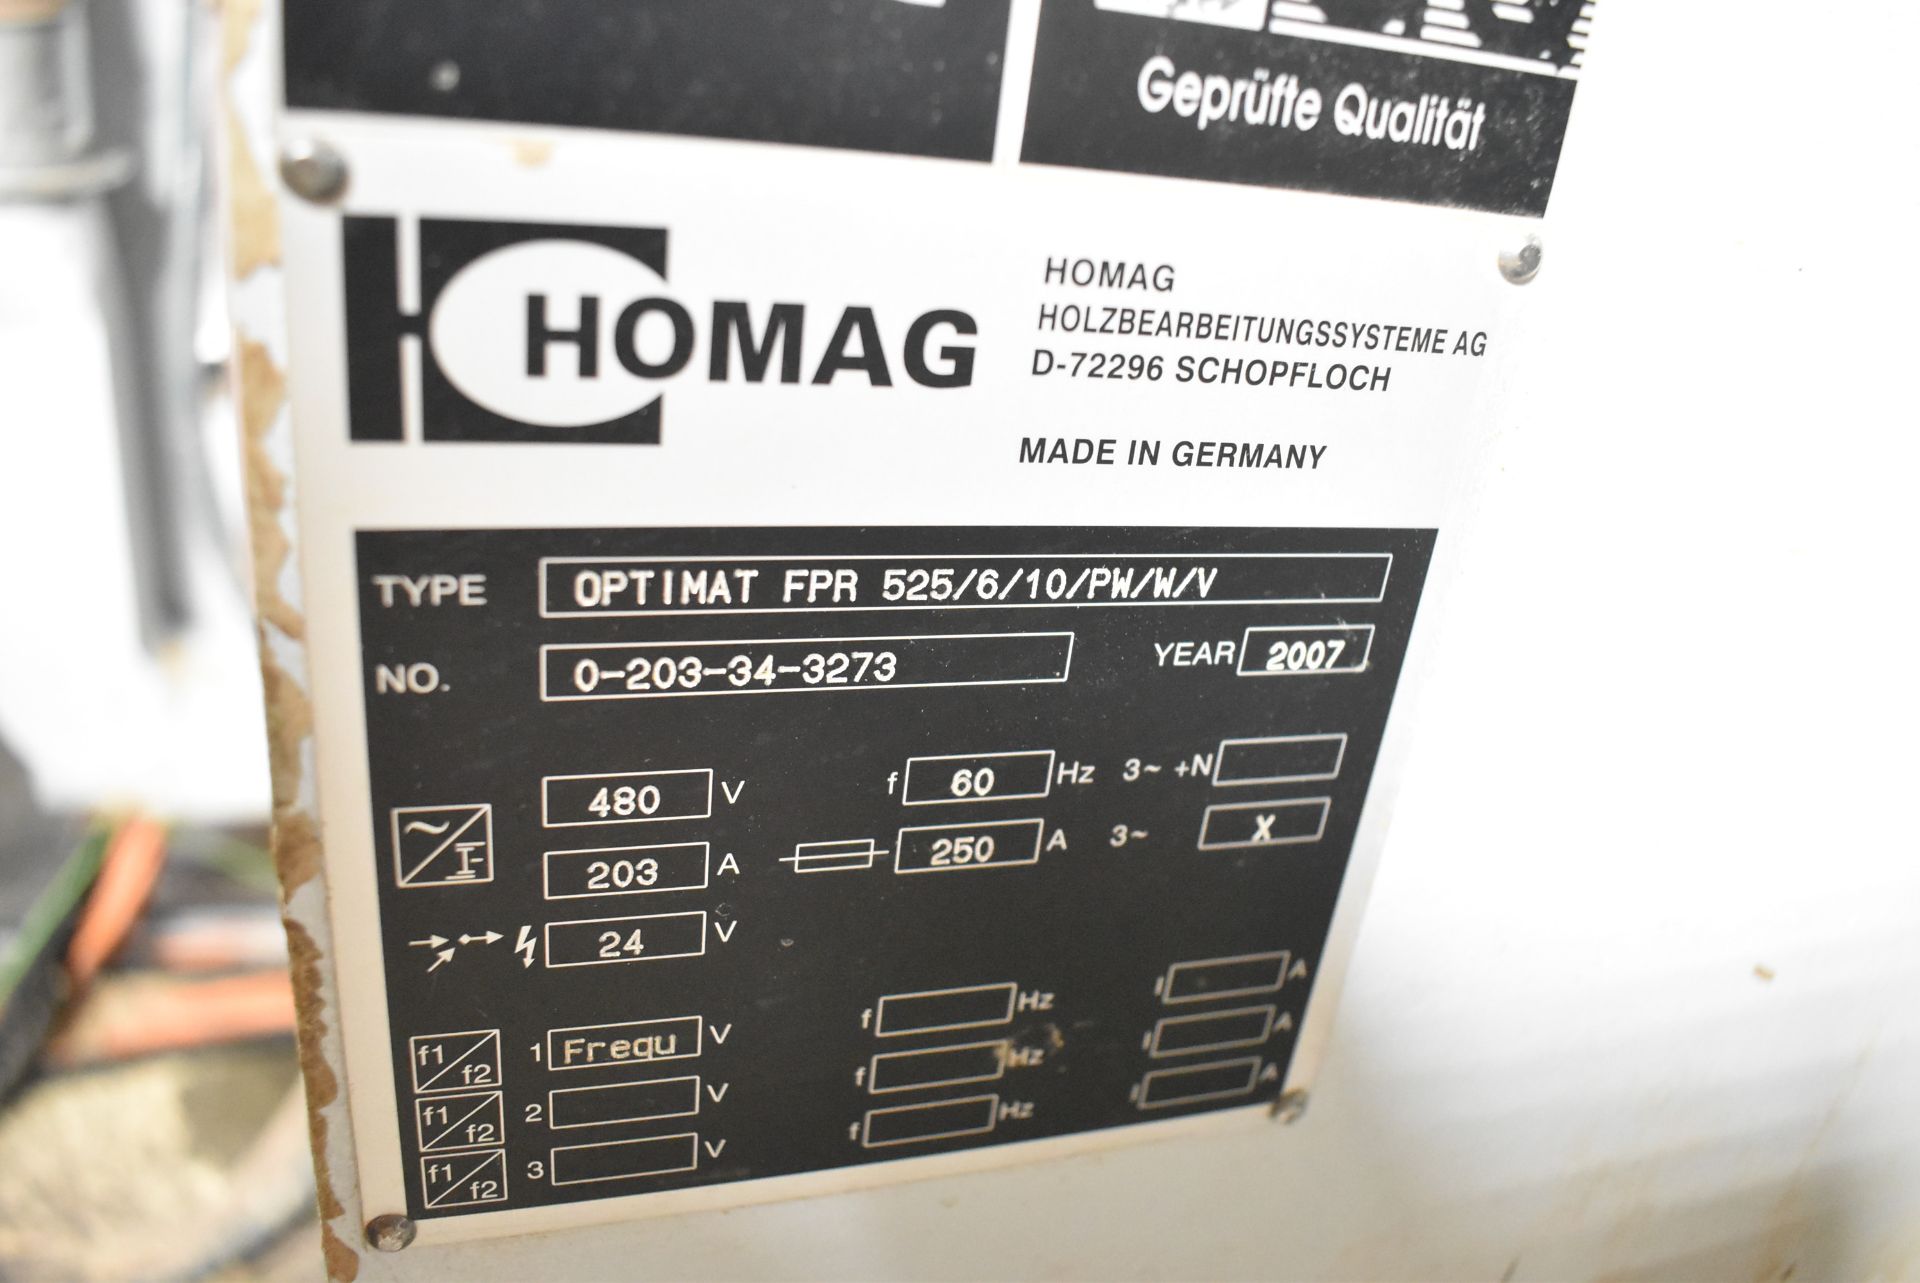 HOMAG (2007) OPTIMAT FPR 525/6/10/PW/W/V CNC 6 SPINDLE DOUBLE END TENONER (CURRENTLY CONFIGURED WITH - Image 23 of 23